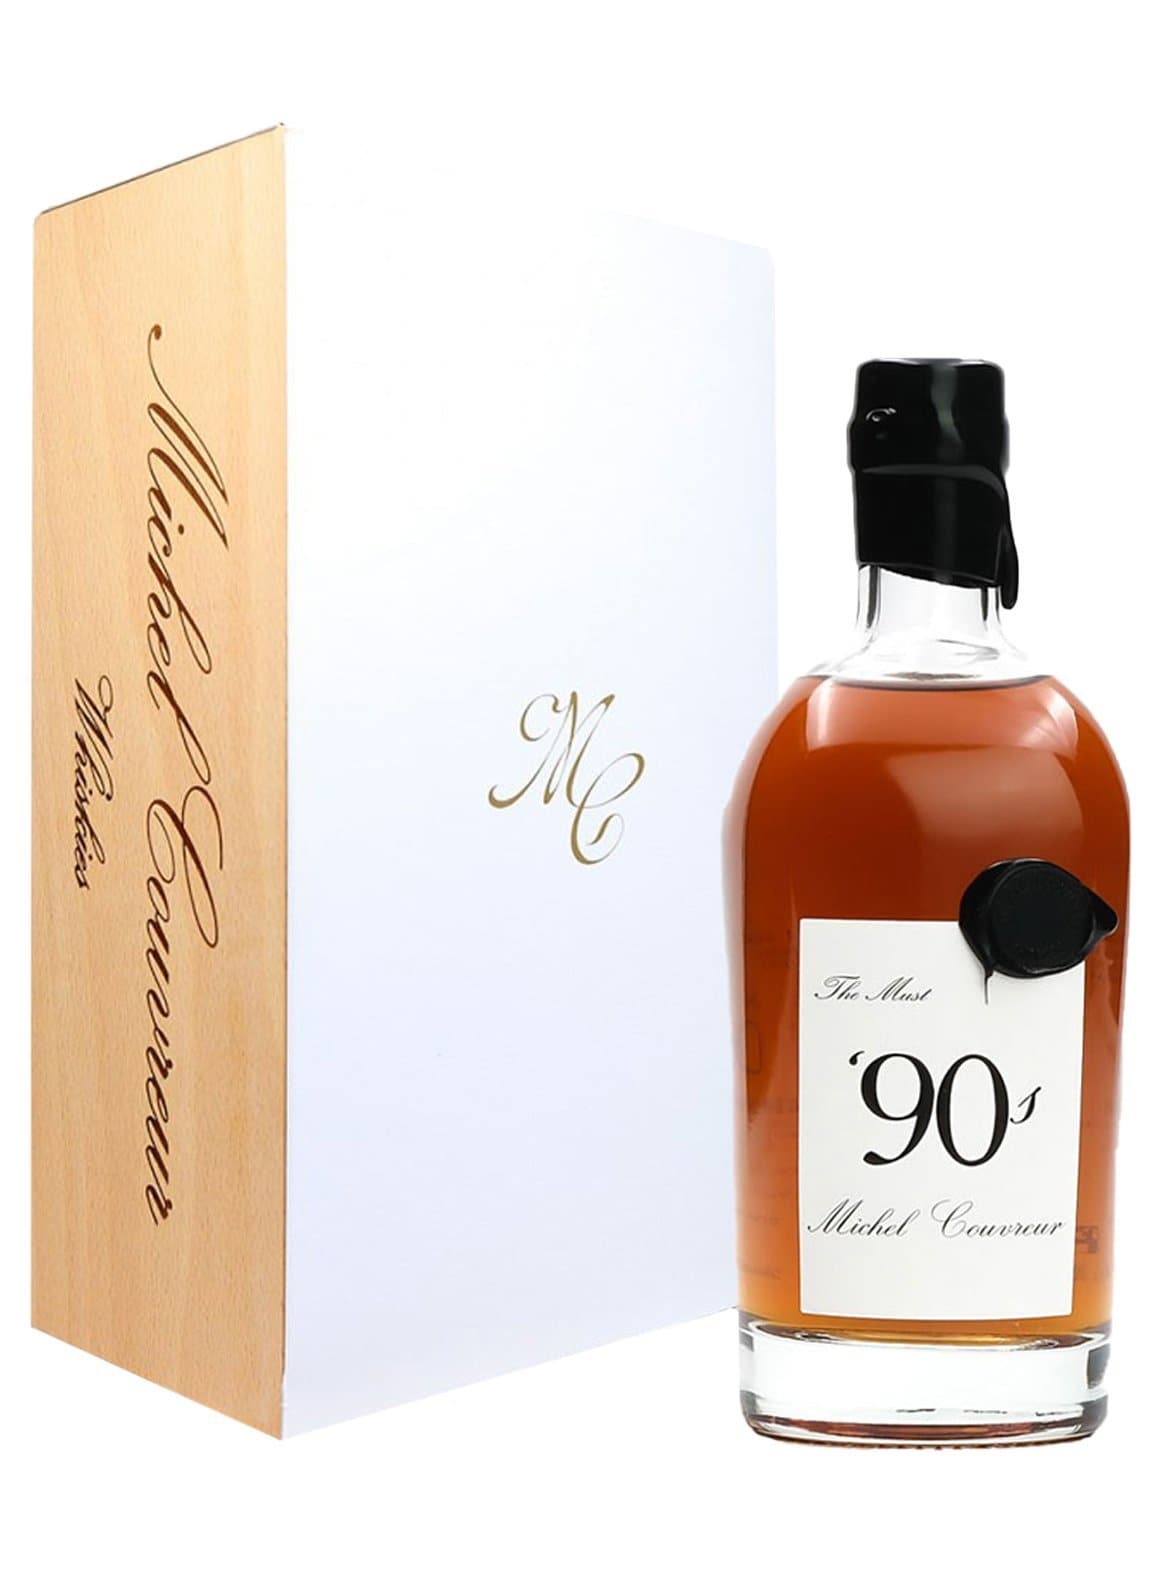 Michel Couvreur Whisky 1990 The Must Single Malt 46% 500ml | Whiskey | Shop online at Spirits of France